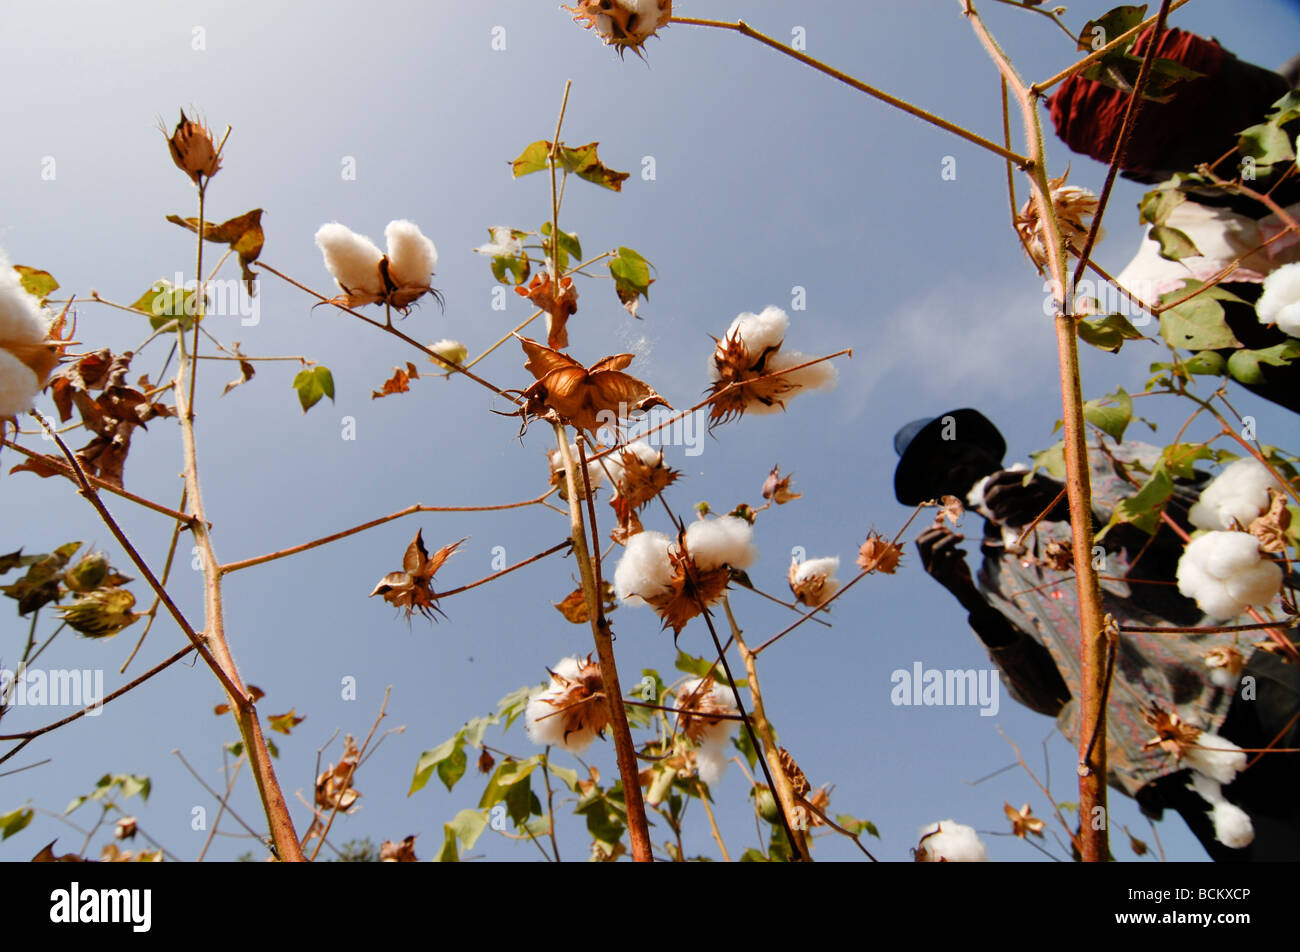 West Africa Burkina Faso , fairtrade and organic cotton project , harvest cotton at farm Stock Photo